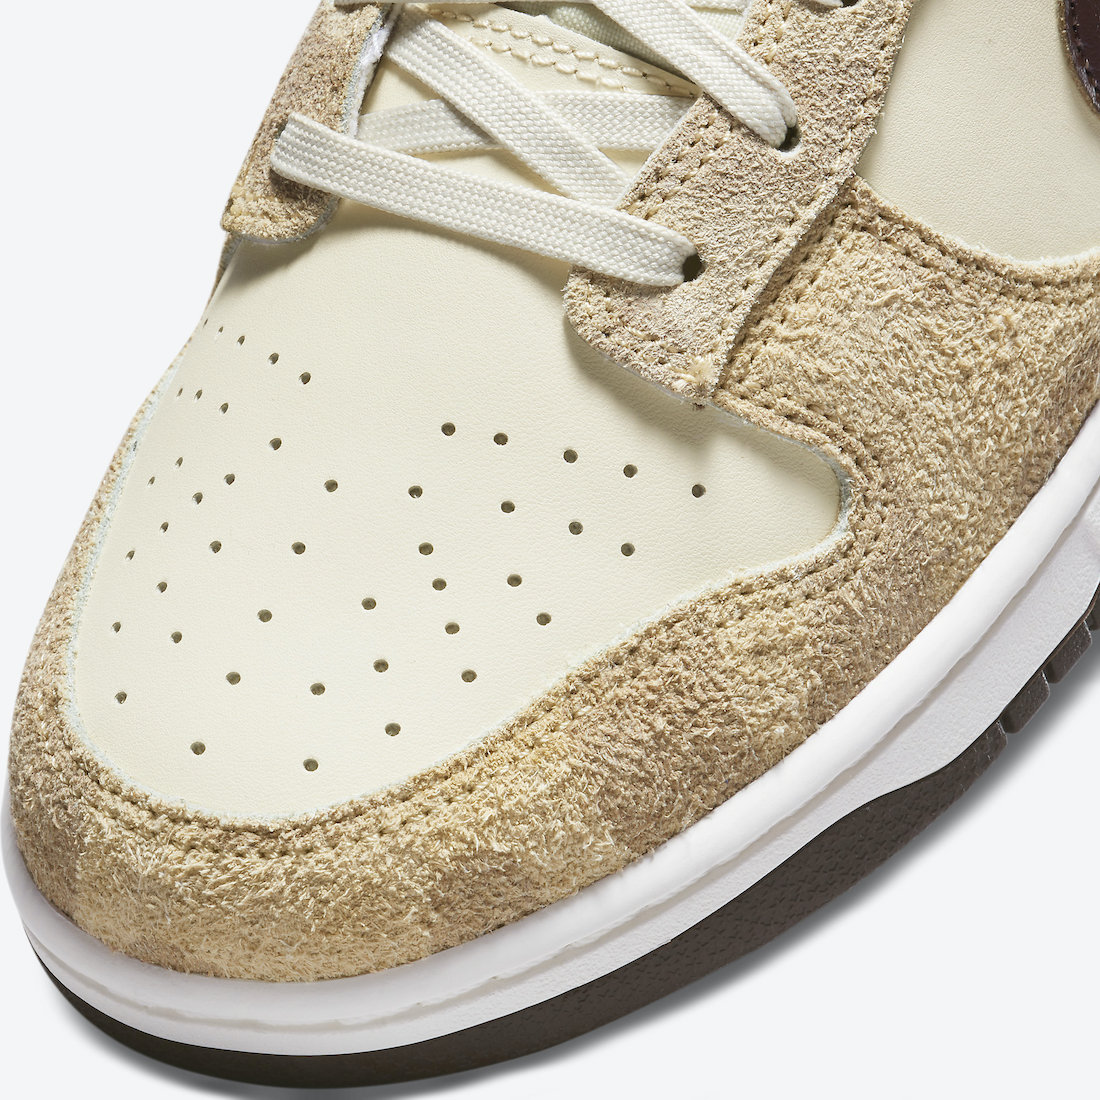 Nike-Dunk-Low-Animal-DH7913-200-Release-Date-6